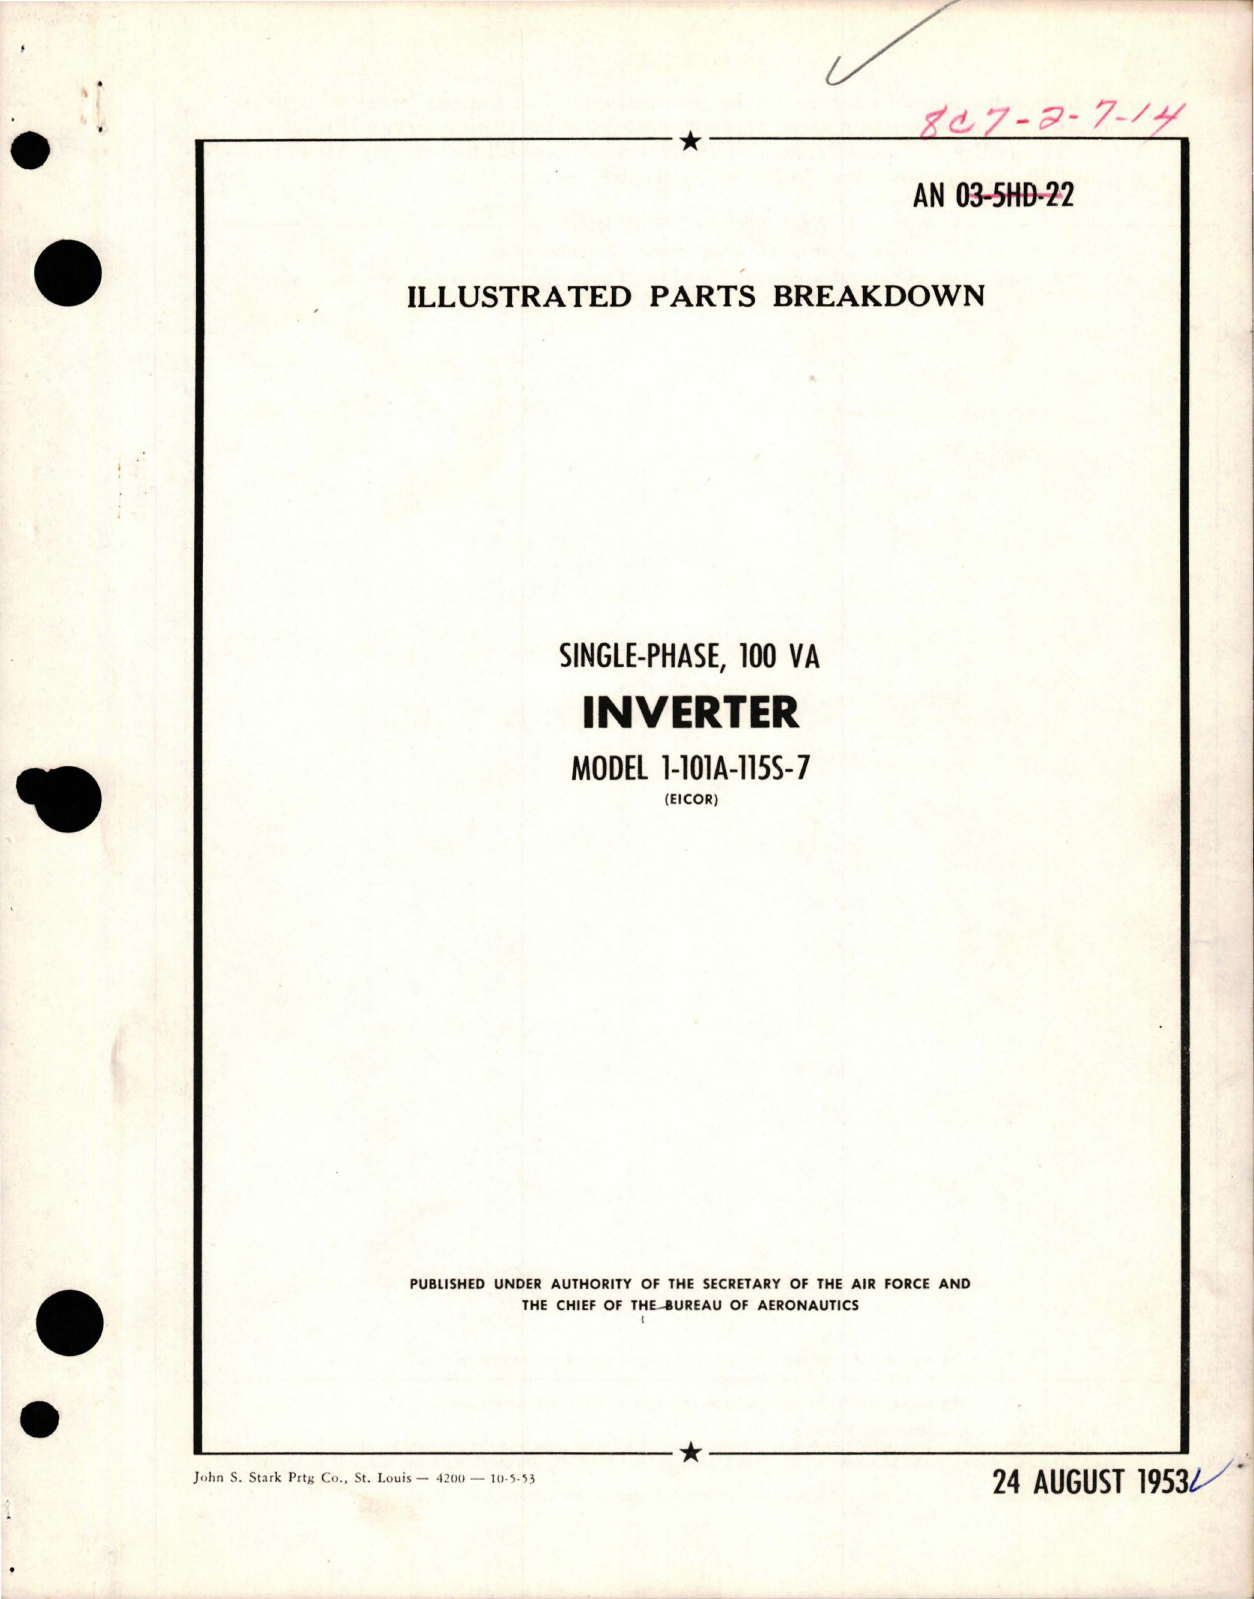 Sample page 1 from AirCorps Library document: Illustrated Parts Breakdown for Single Phase 100 VA Inverter - Model 1-101A-115S-7